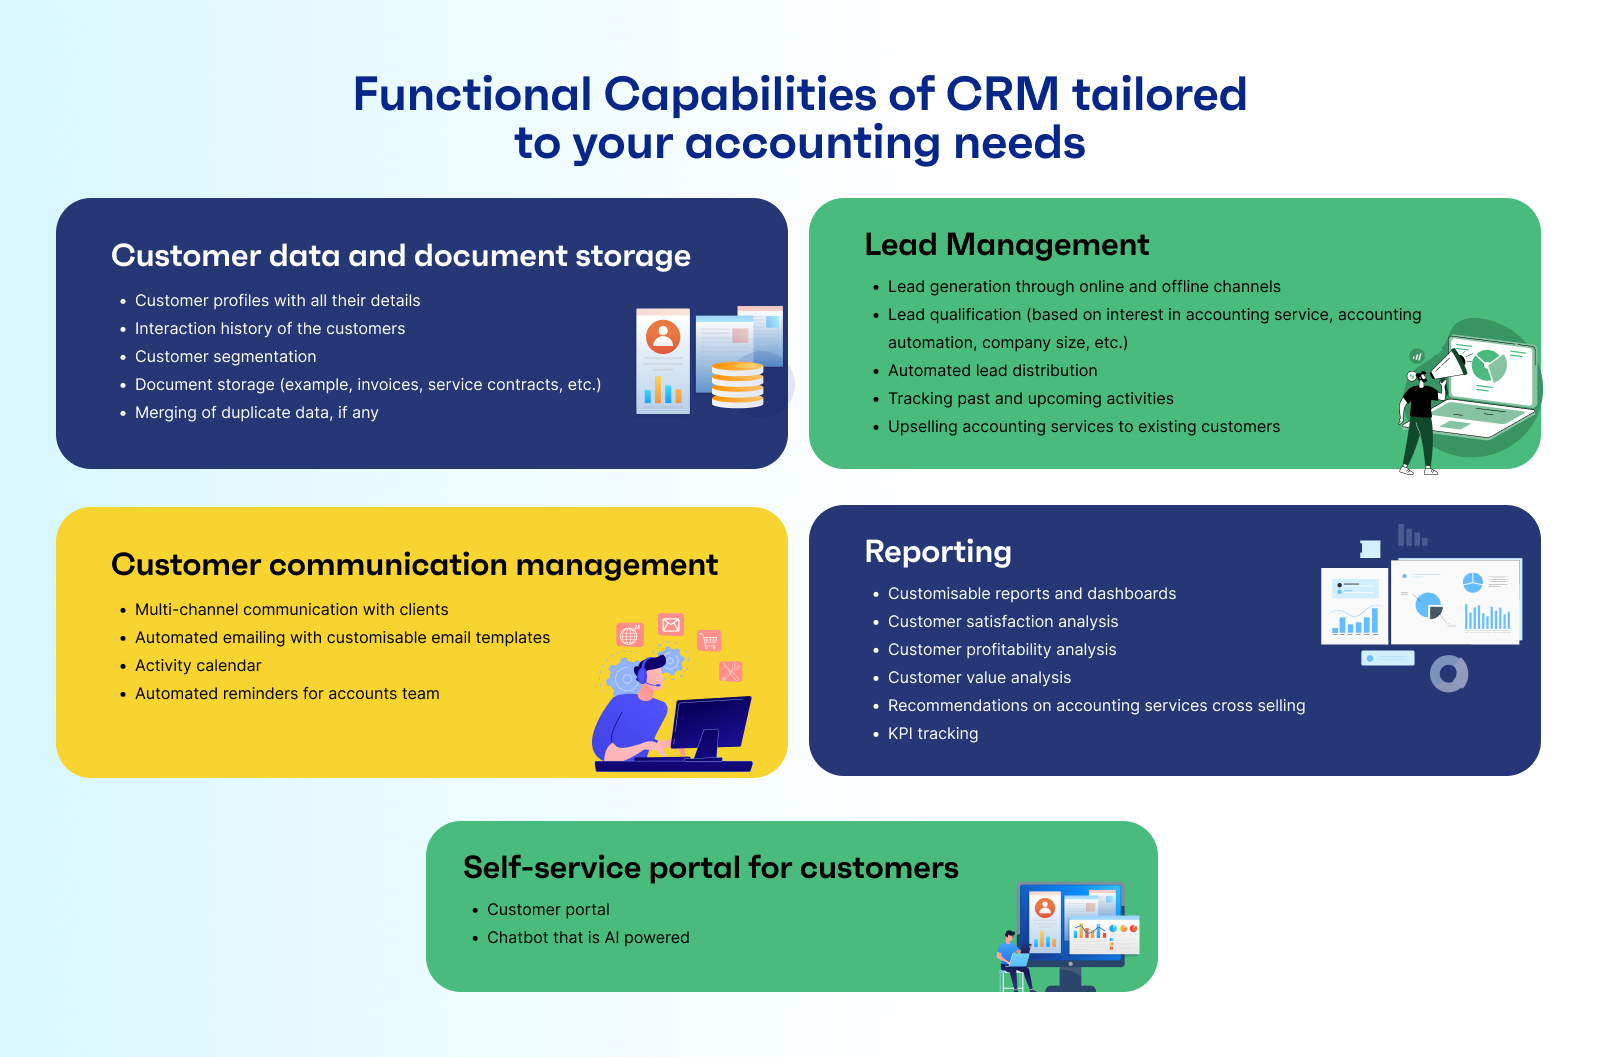 image-functional-capabilities-crm.png